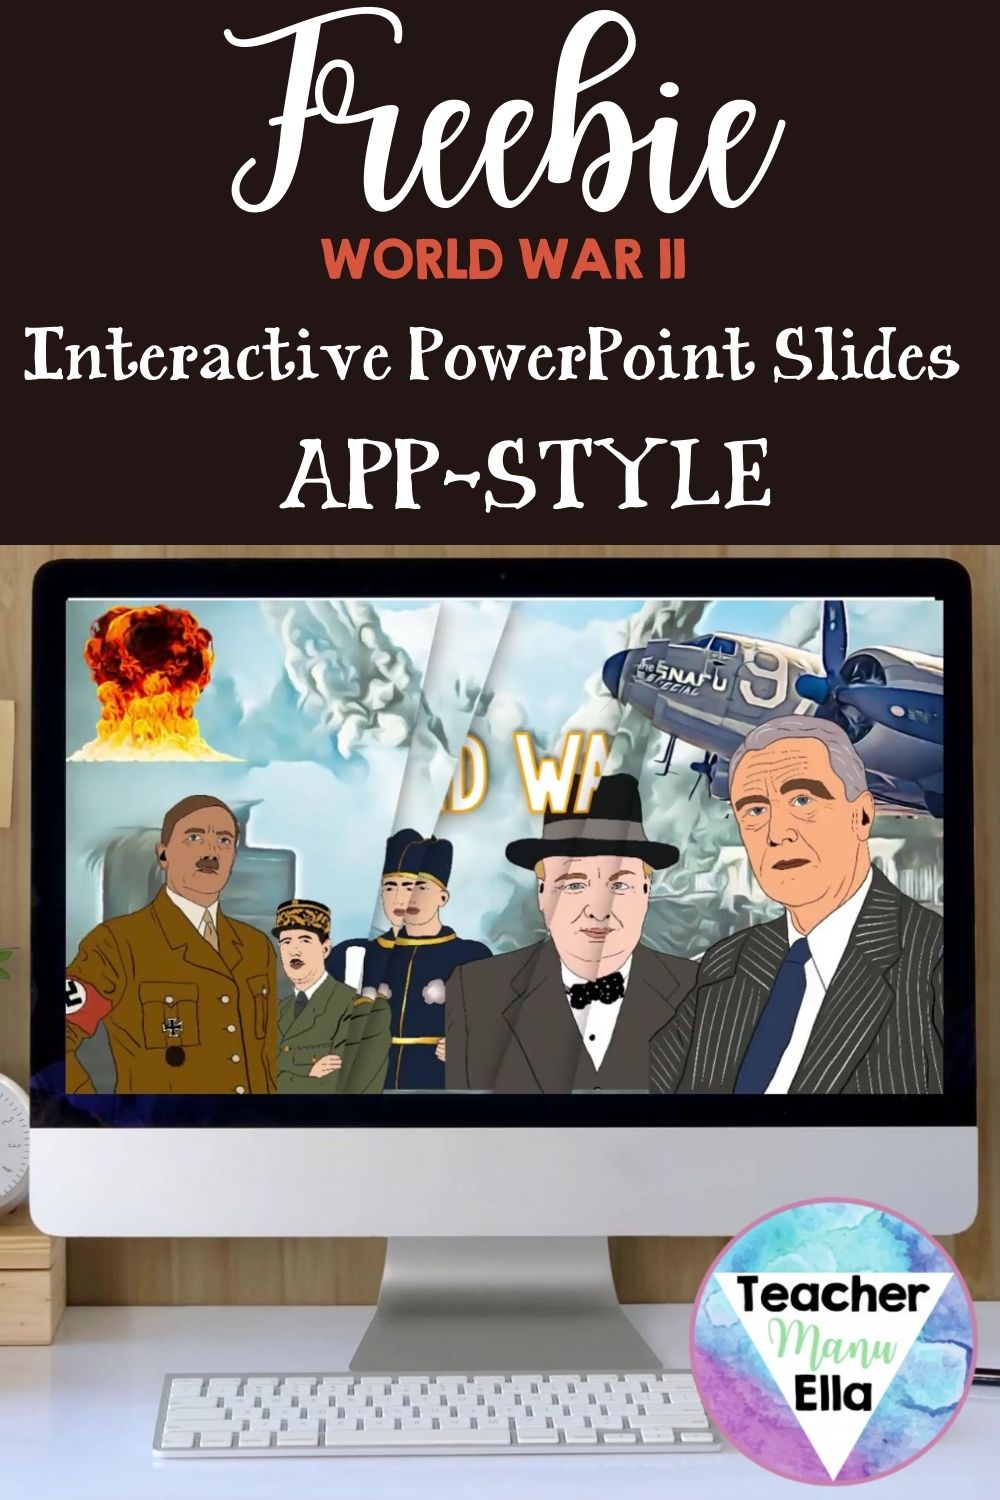 Social Studies Activties for Middle School - Digital interactive PowerPoint 14 slides for free